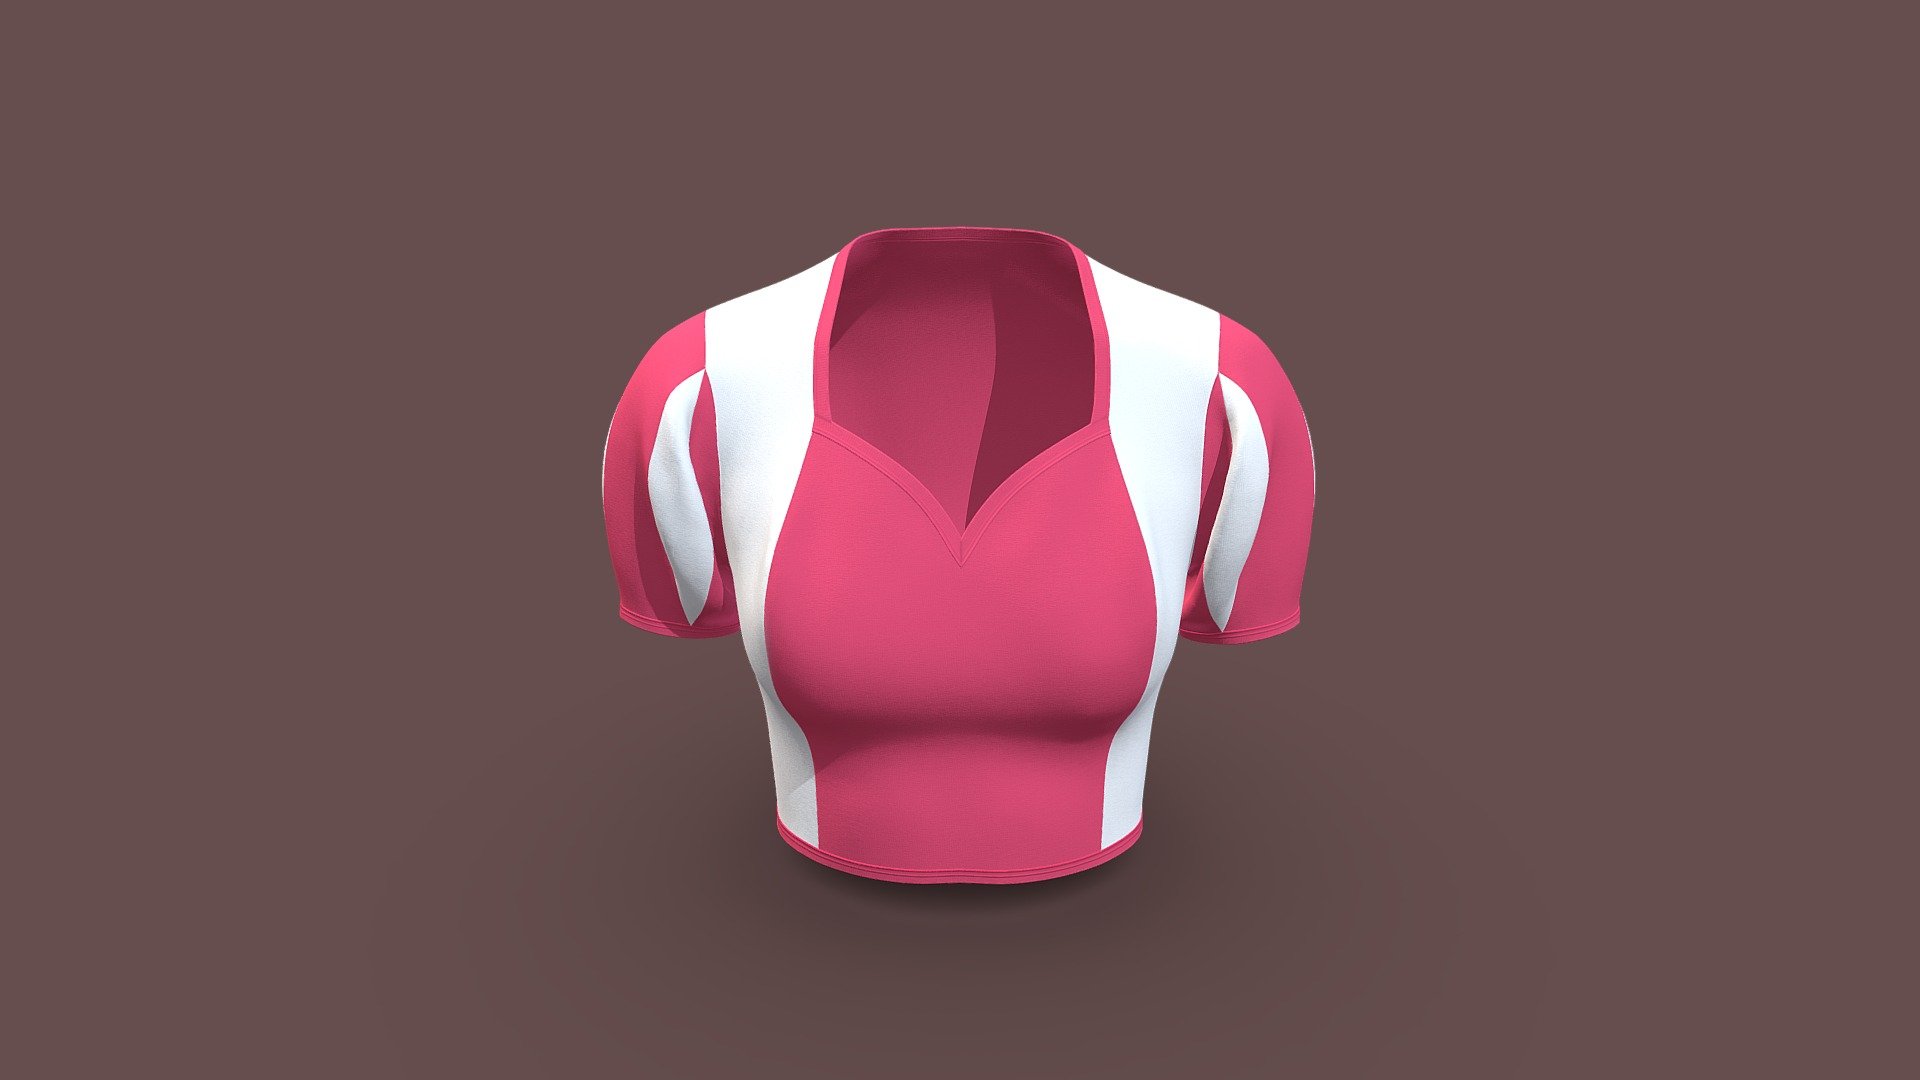 Cloth Title = Sporty Bra 3D Design  

SKU = DG100115 

Category = Women 

Product Type = Bra 

Cloth Length = Regular 

Body Fit = Regular Fit 

Occasion = Beach 

Sleeve Style = Set In Sleeve 


Our Services:

3D Apparel Design.

OBJ,FBX,GLTF Making with High/Low Poly.

Fabric Digitalization.

Mockup making.

3D Teck Pack.

Pattern Making.

2D Illustration.

Cloth Animation and 360 Spin Video.


Contact us:- 

Email: info@digitalfashionwear.com 

Website: https://digitalfashionwear.com 

WhatsApp No: +8801759350445 


We designed all the types of cloth specially focused on product visualization, e-commerce, fitting, and production. 

We will design: 

T-shirts 

Polo shirts 

Hoodies 

Sweatshirt 

Jackets 

Shirts 

TankTops 

Trousers 

Bras 

Underwear 

Blazer 

Aprons 

Leggings 

and All Fashion items. 





Our goal is to make sure what we provide you, meets your demand 3d model